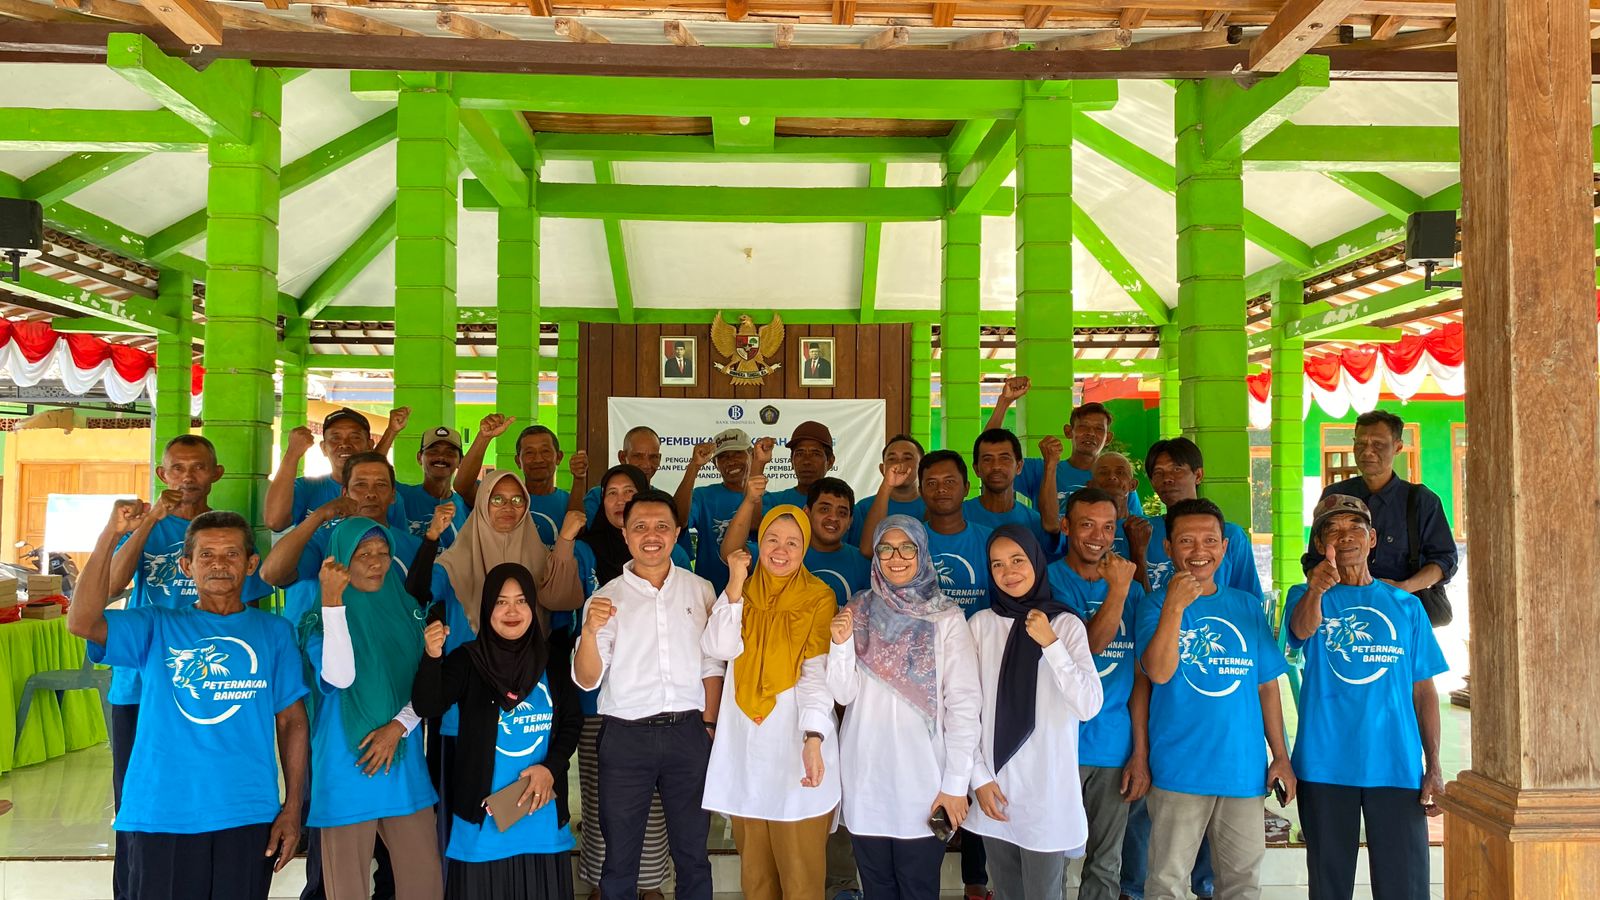 Opening of the Field School: Strengthening the Ustan Mandiri Livestock Group and Training in Fattening and Breeding Towards Independence in Beef Cattle Business